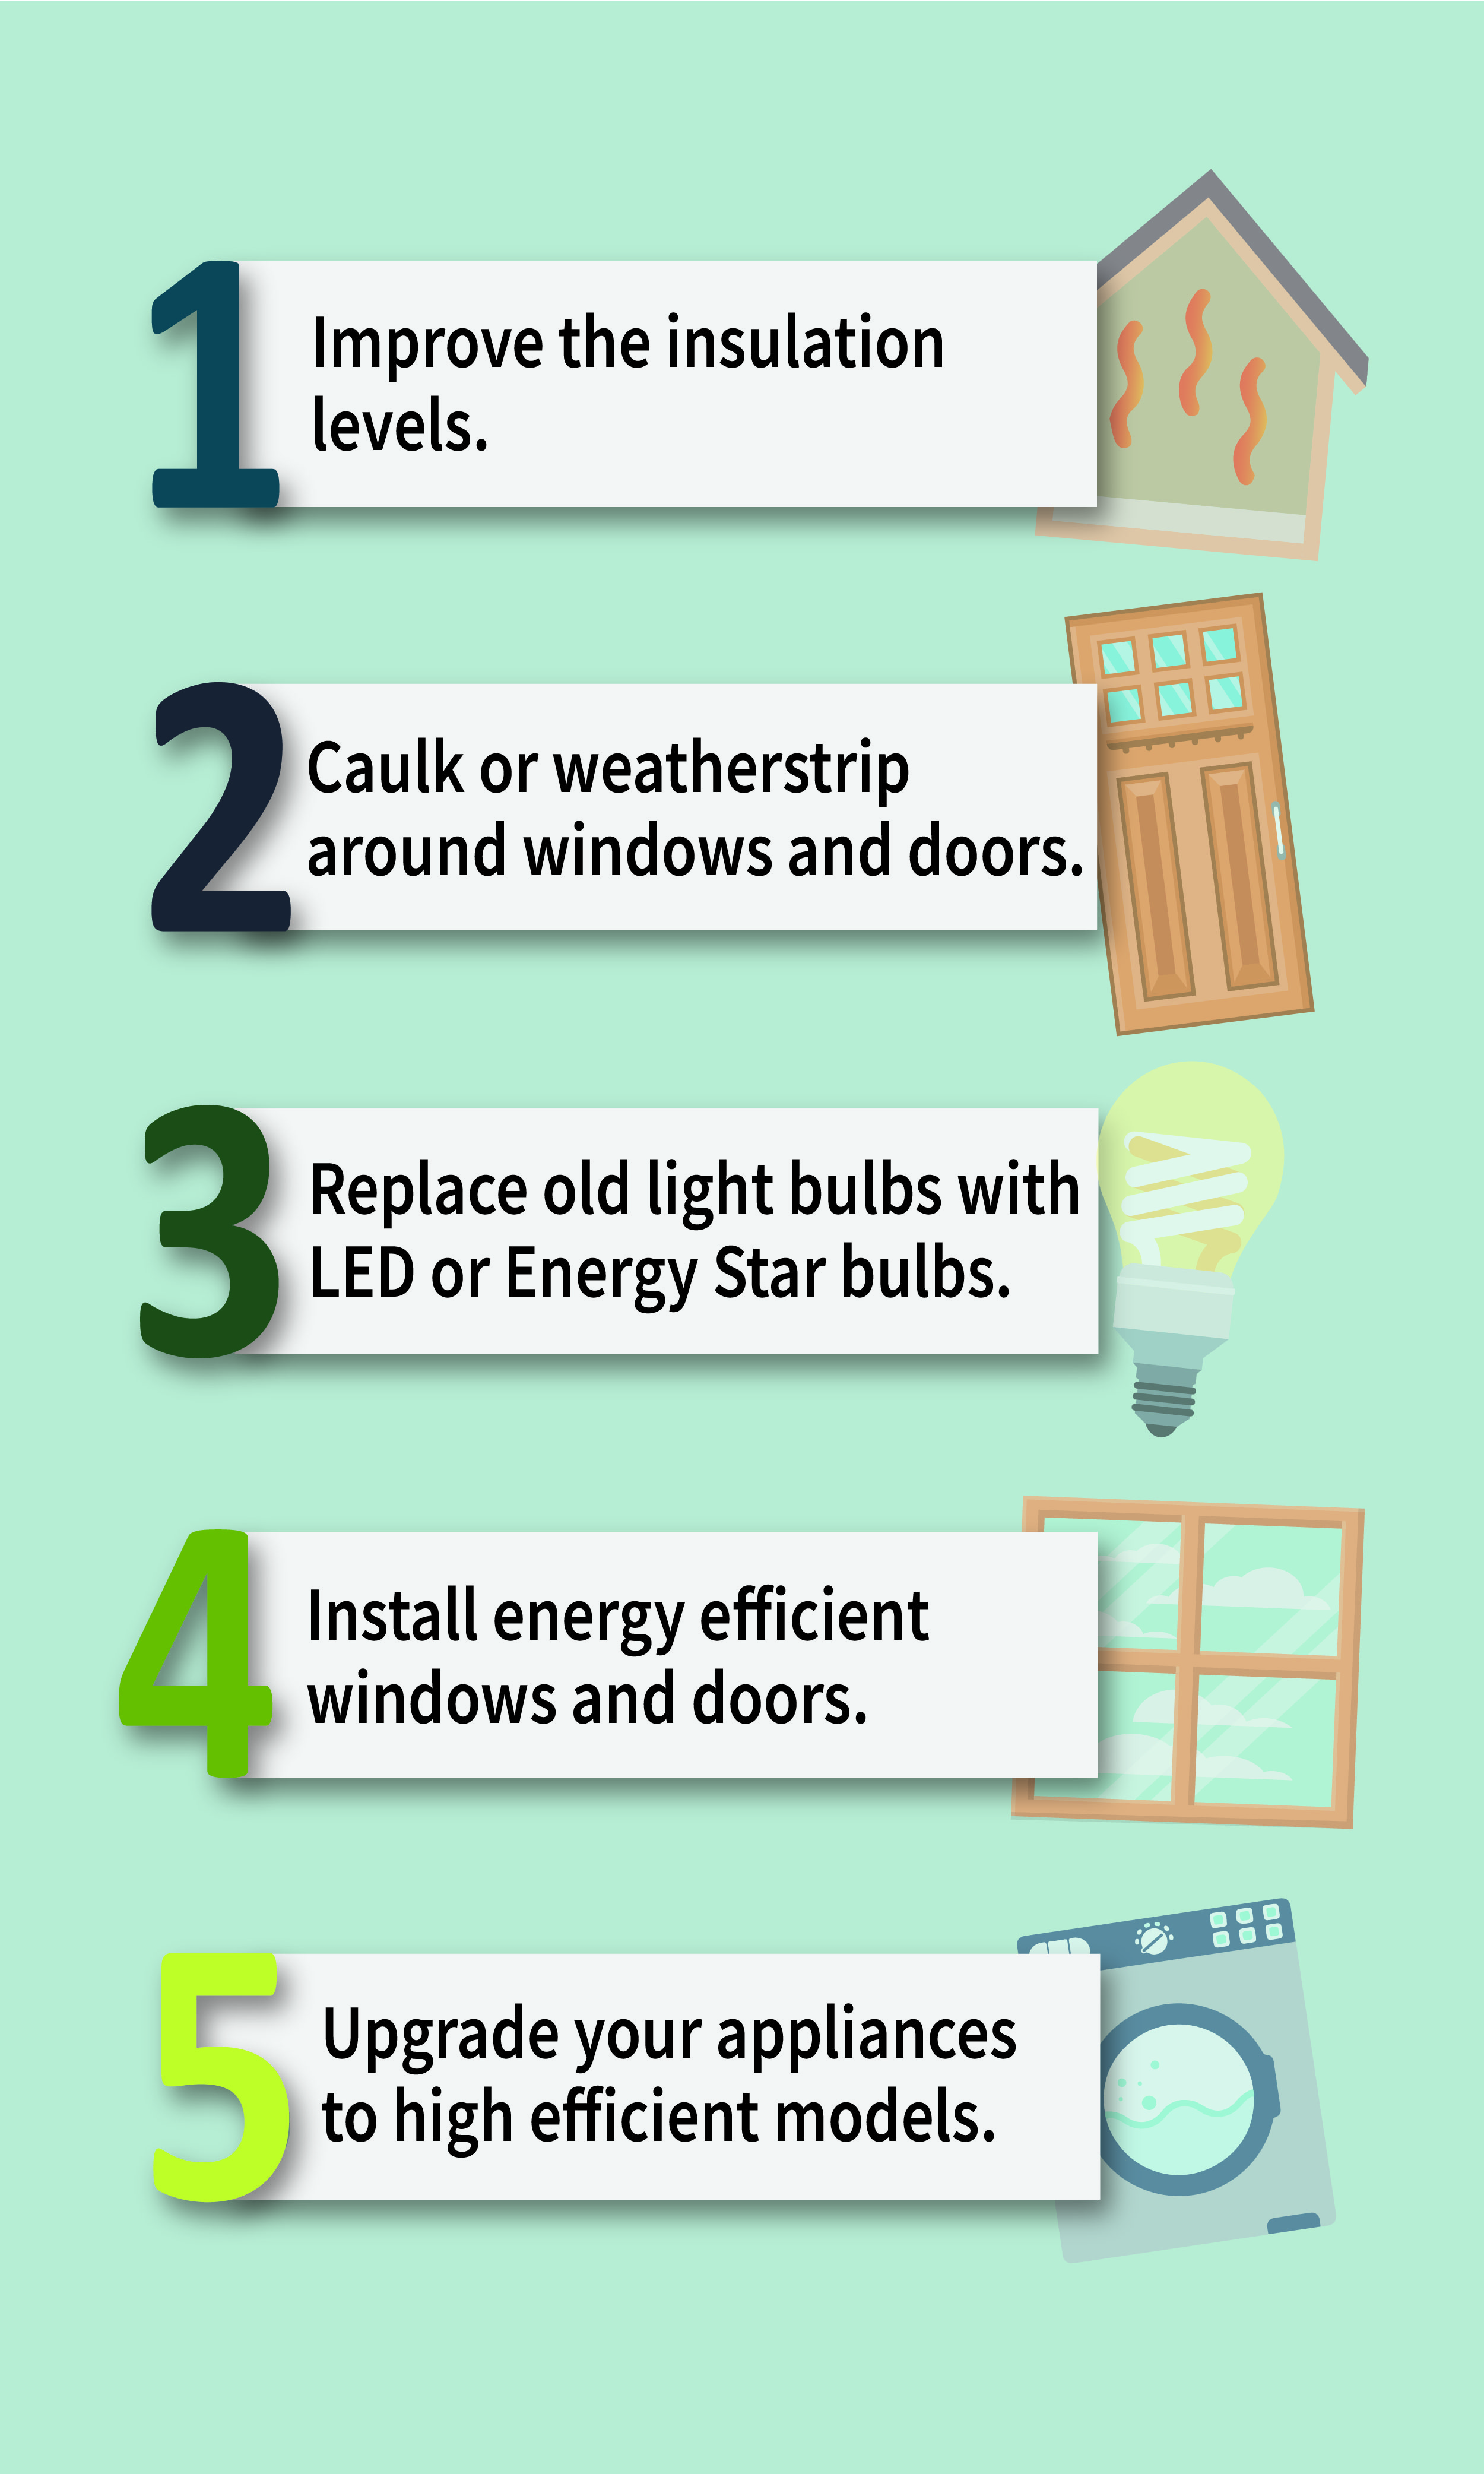 Top 10 upgrades for an energy efficient home